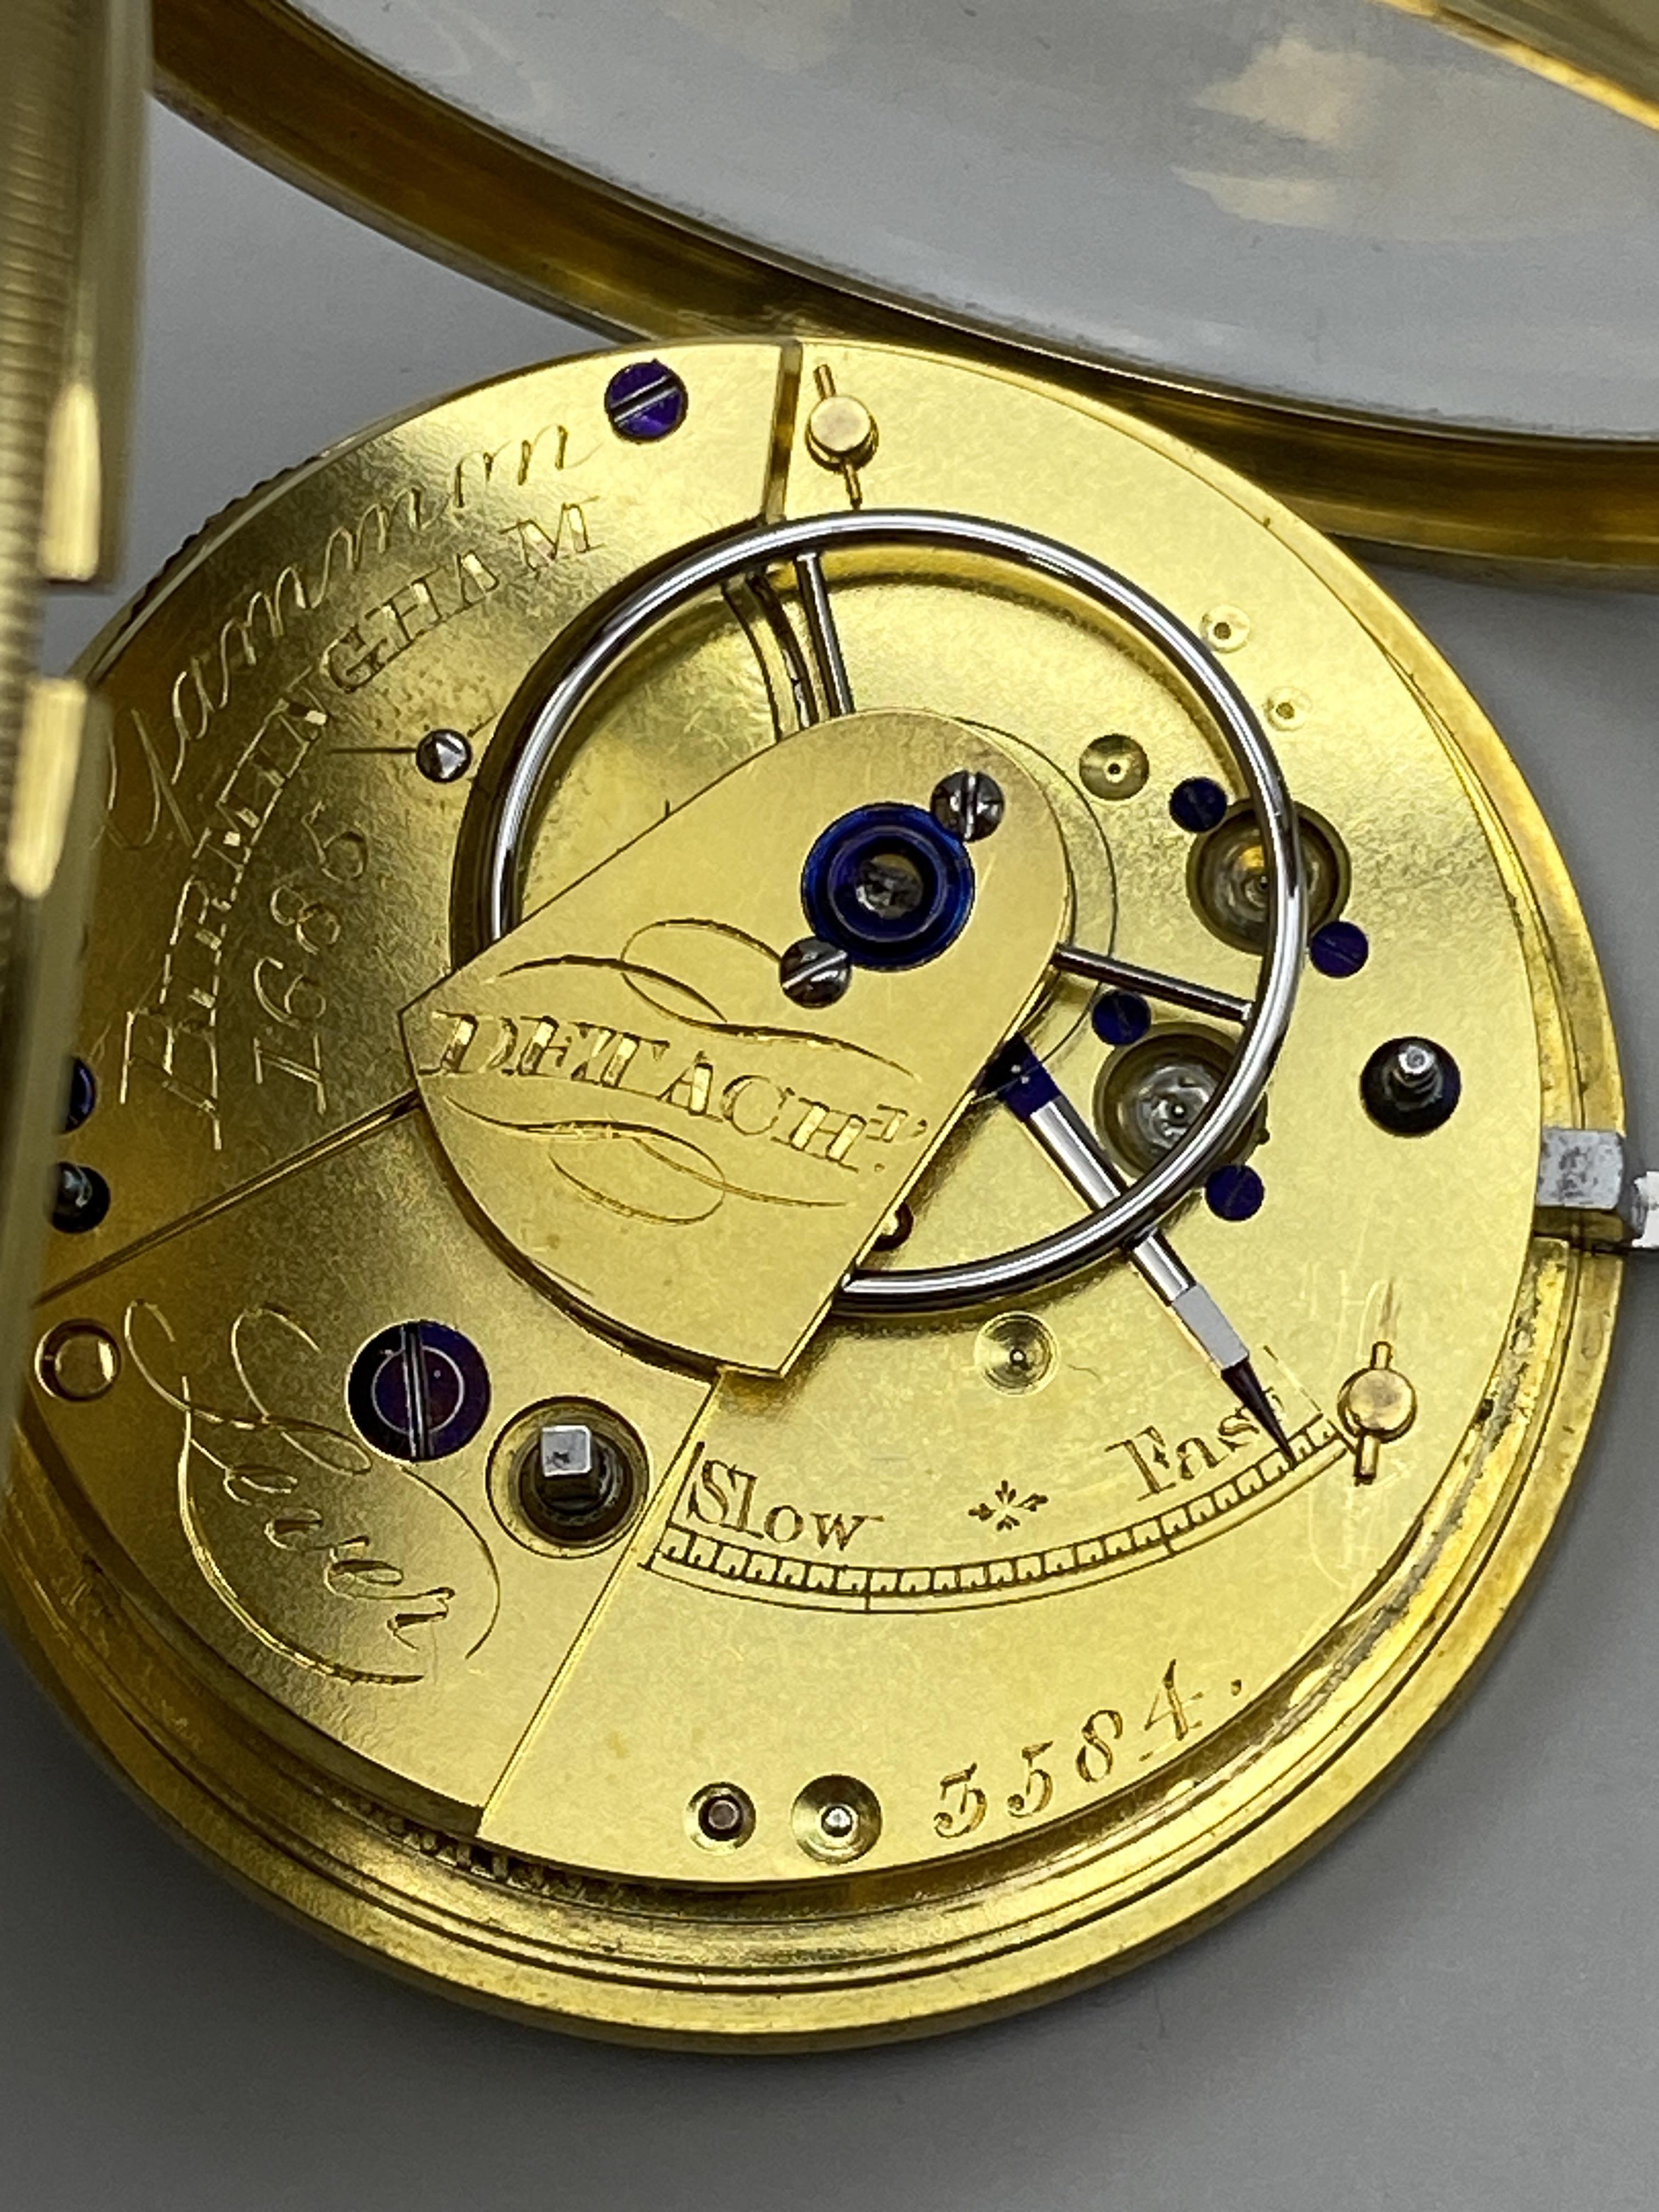 18ct Gold Fusee Pocket Watch by Gammon of Birmingham '1685', No.3584. - Image 31 of 48